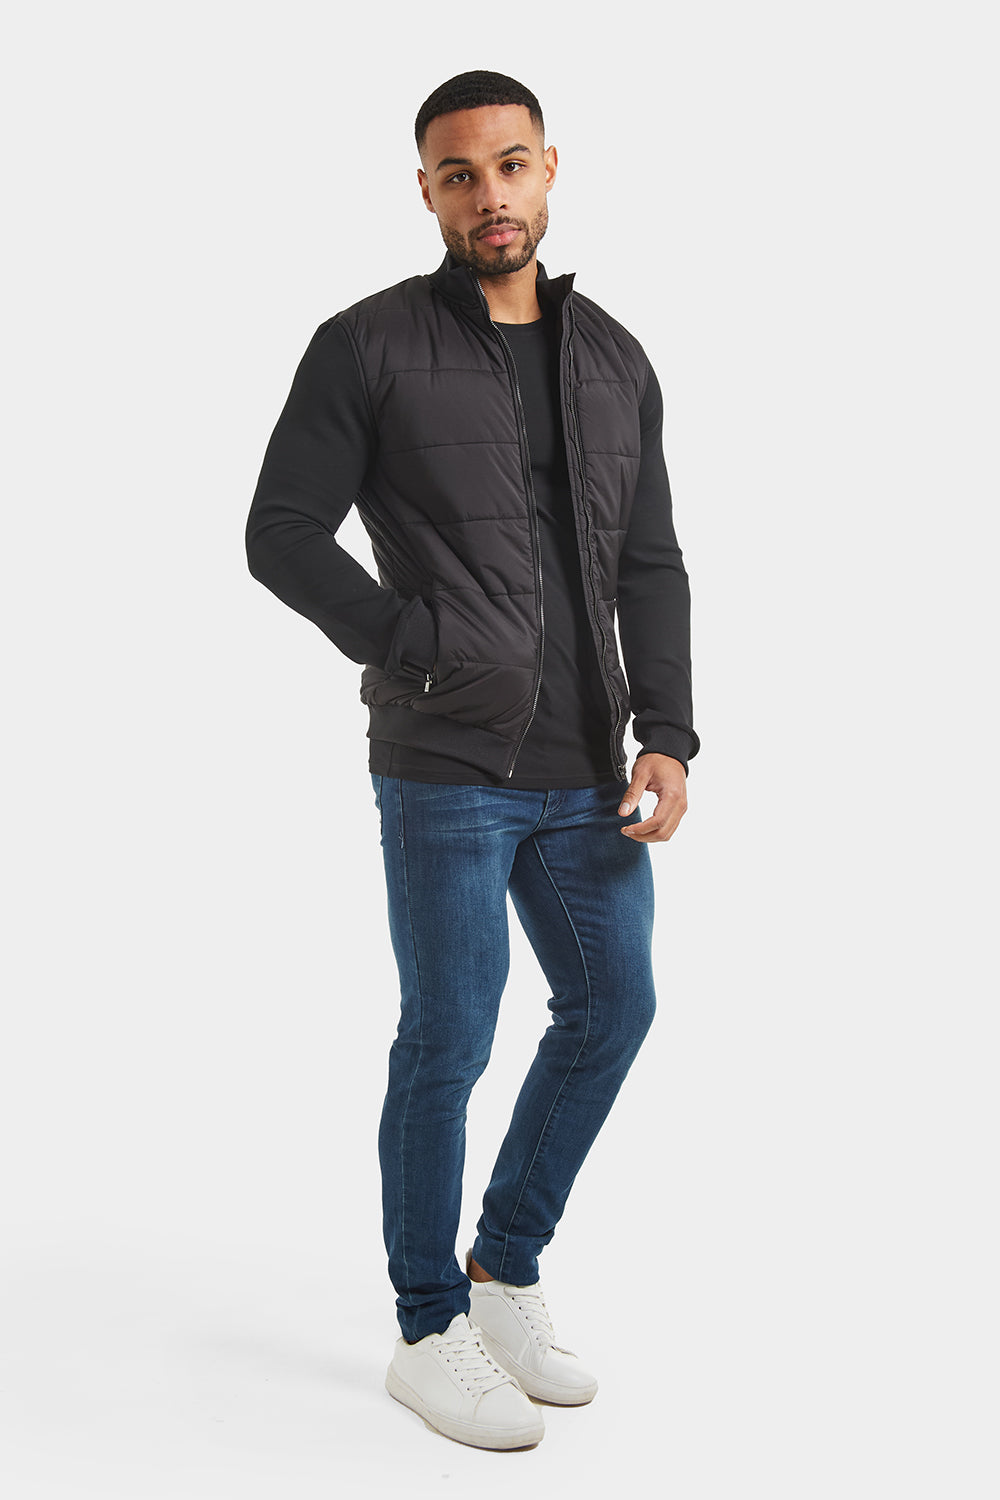 Quilted Hybrid Jacket in Black - TAILORED ATHLETE - ROW